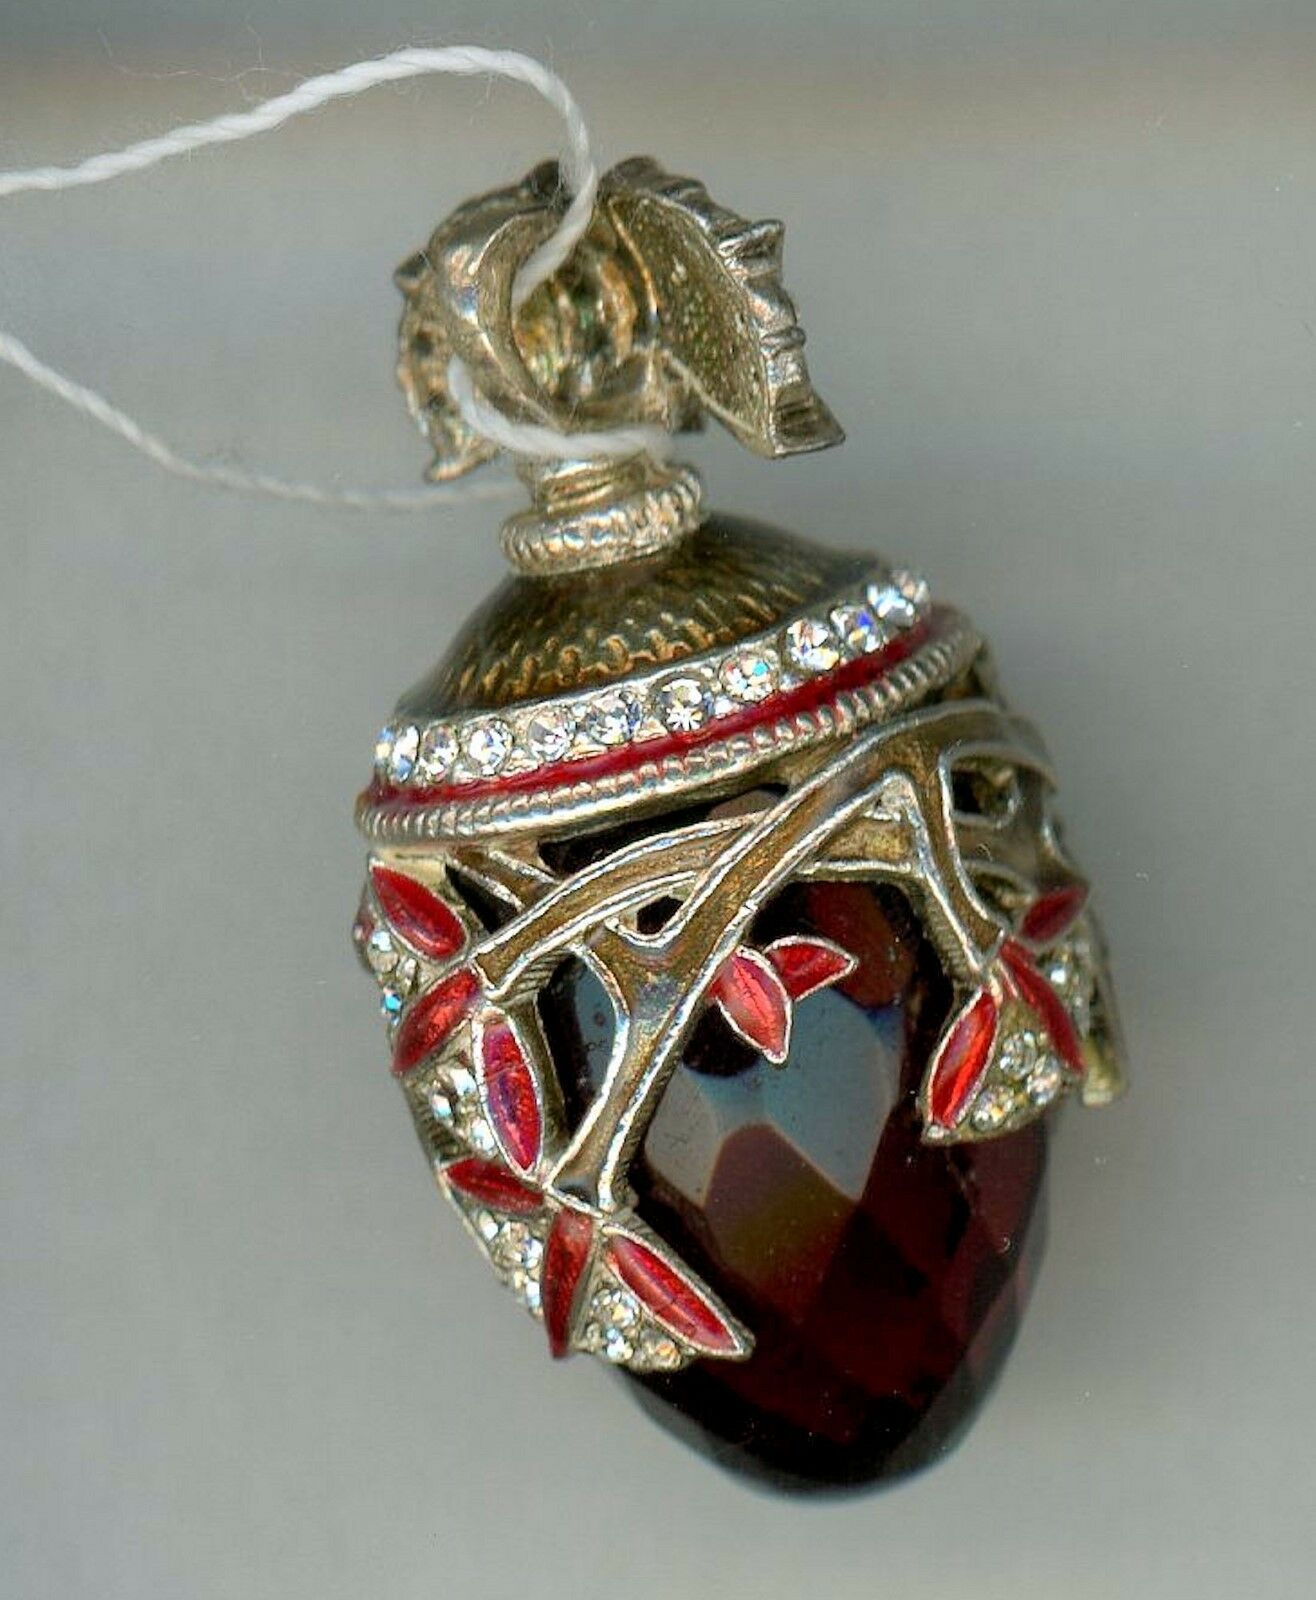 Russian Faberge egg Pendant LARGE RED GEM  w/ciras of w/gold decor & stones. - $69.25